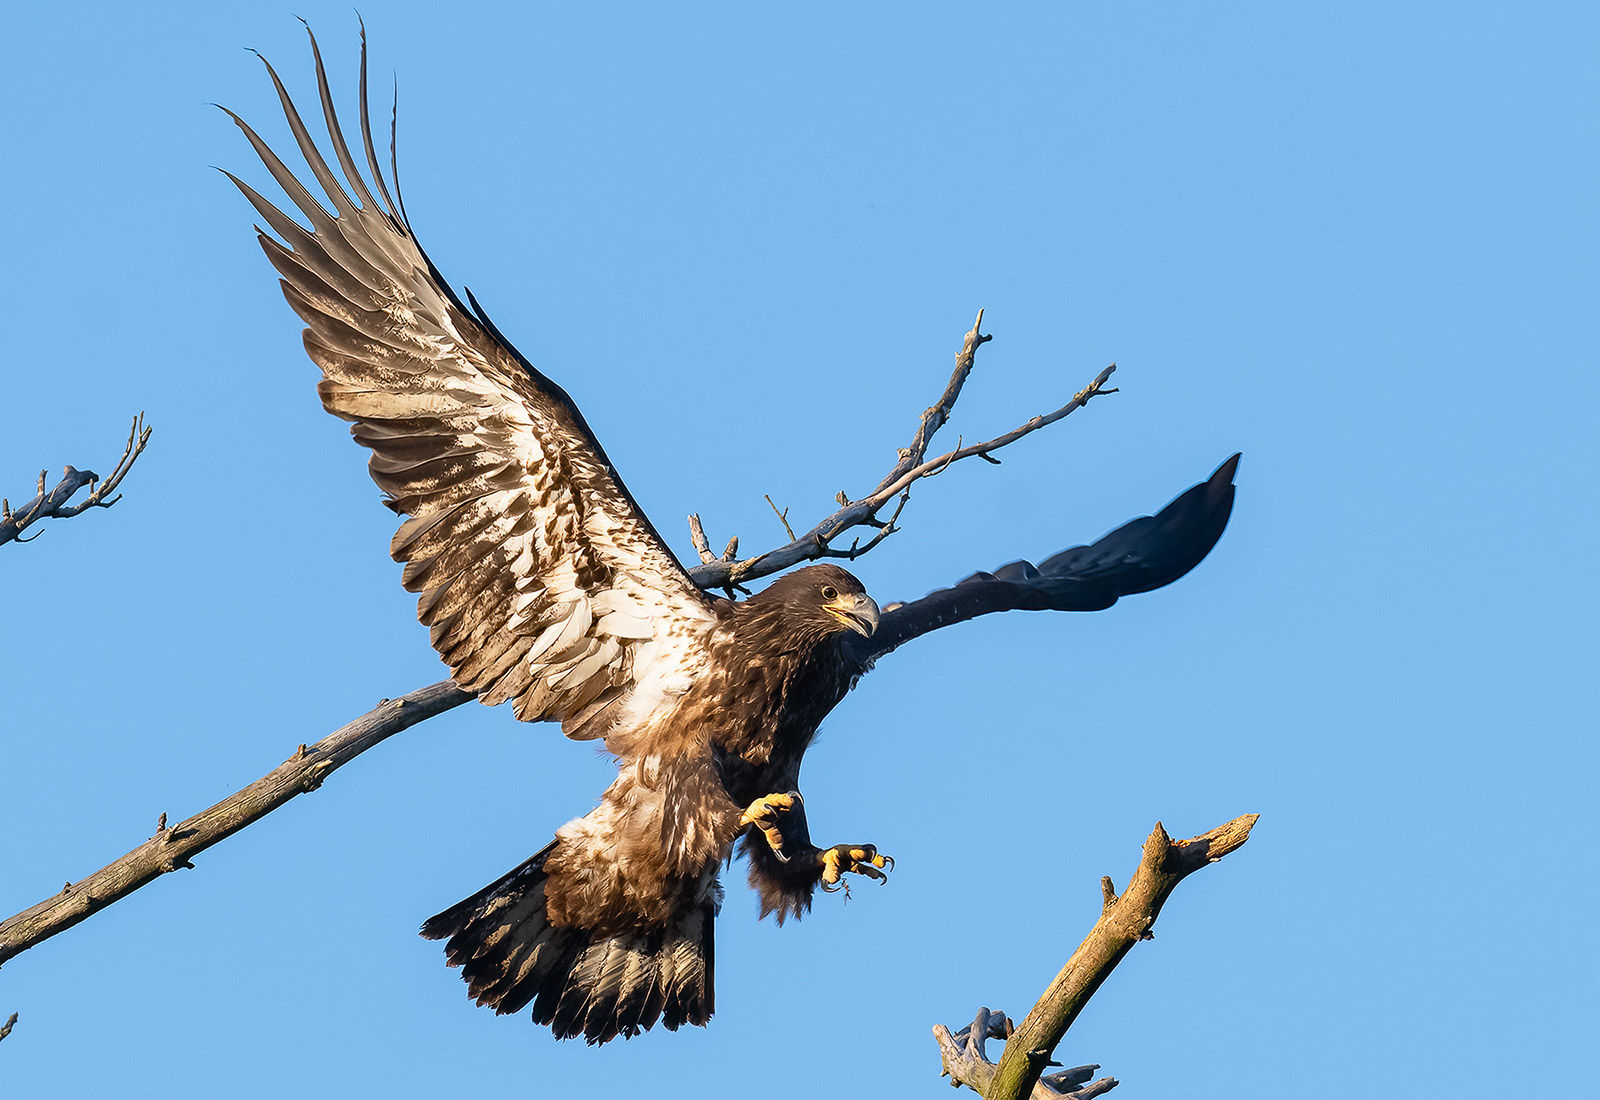 Juvenile Eagle jumping to a branch